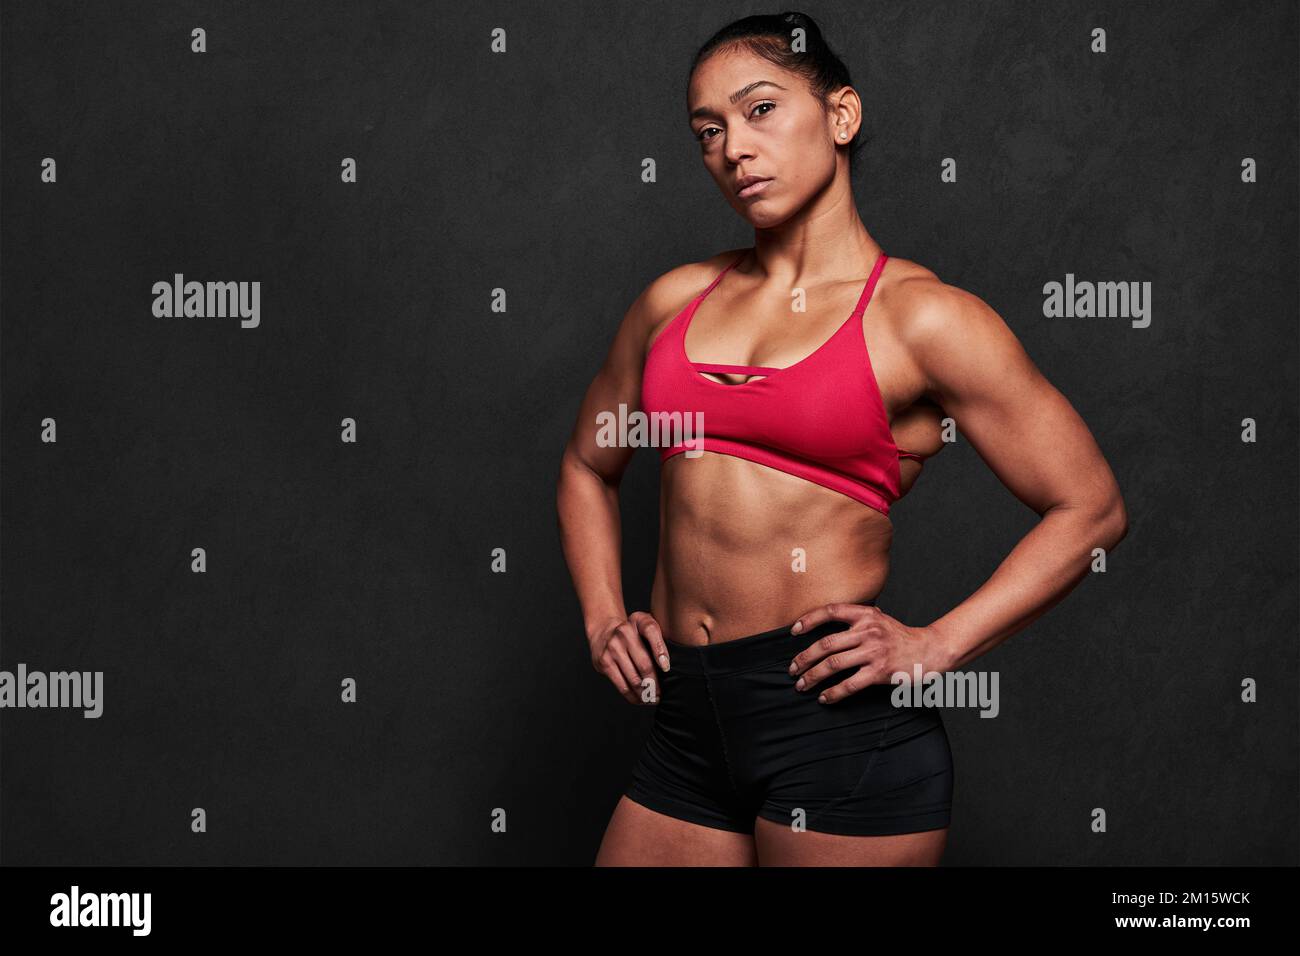 Abs - Female Anatomy Muscles Stock Photo - Alamy